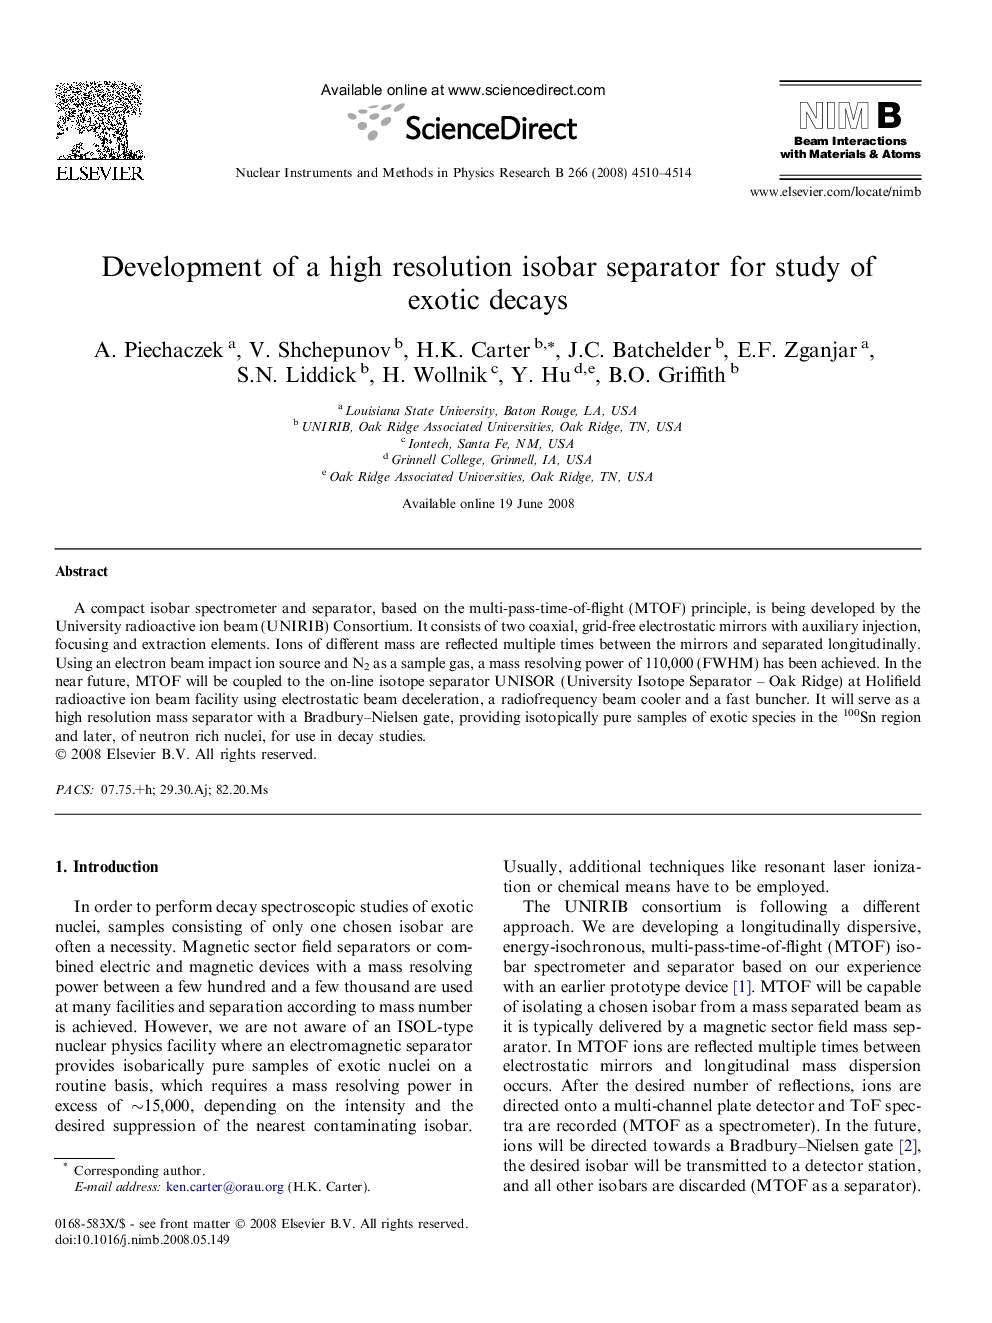 Development of a high resolution isobar separator for study of exotic decays